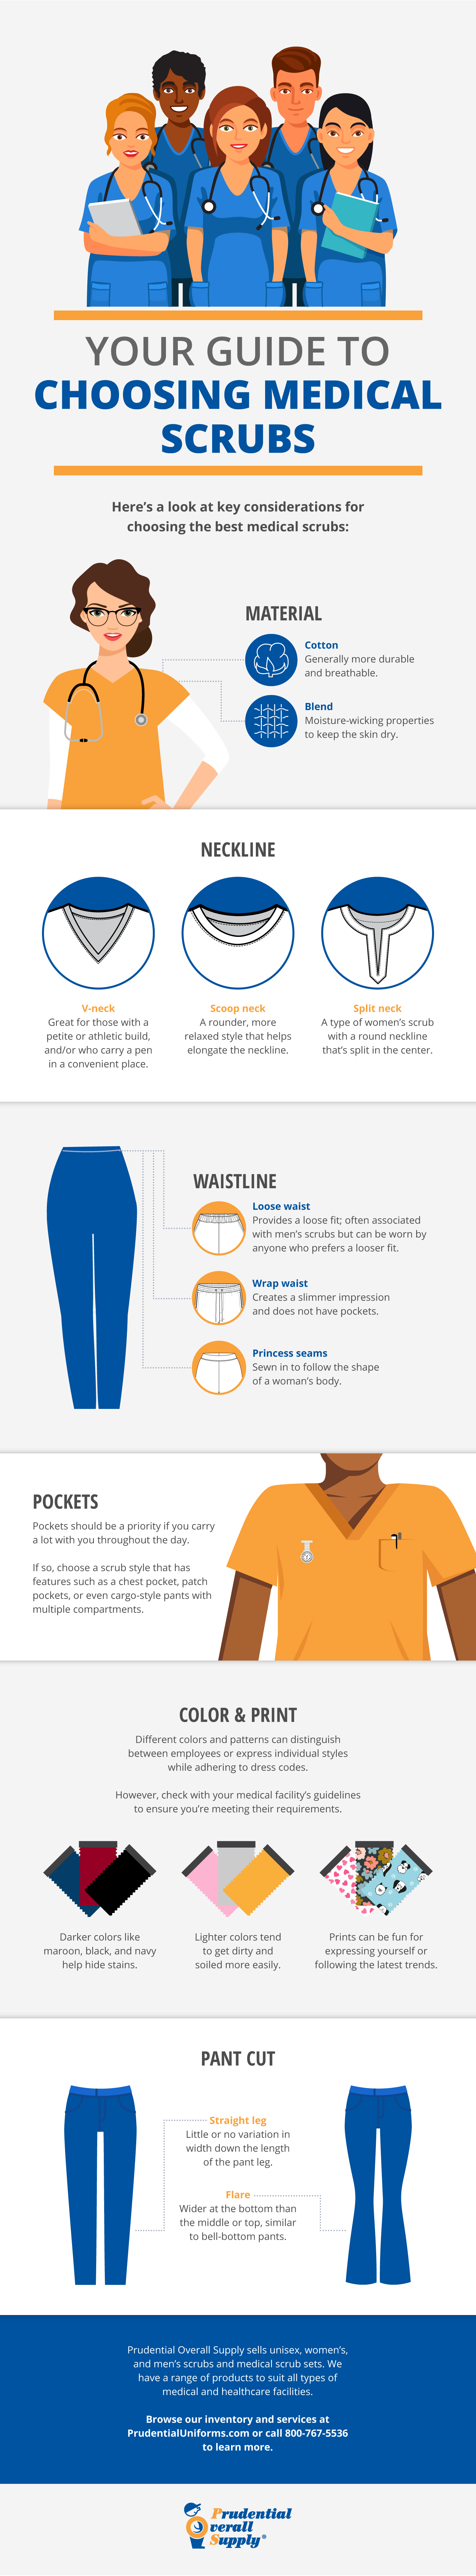 Dress Codes & What They Mean [Infographic] - His & Her Guide To Appropriate  Attire For Each Dress Code